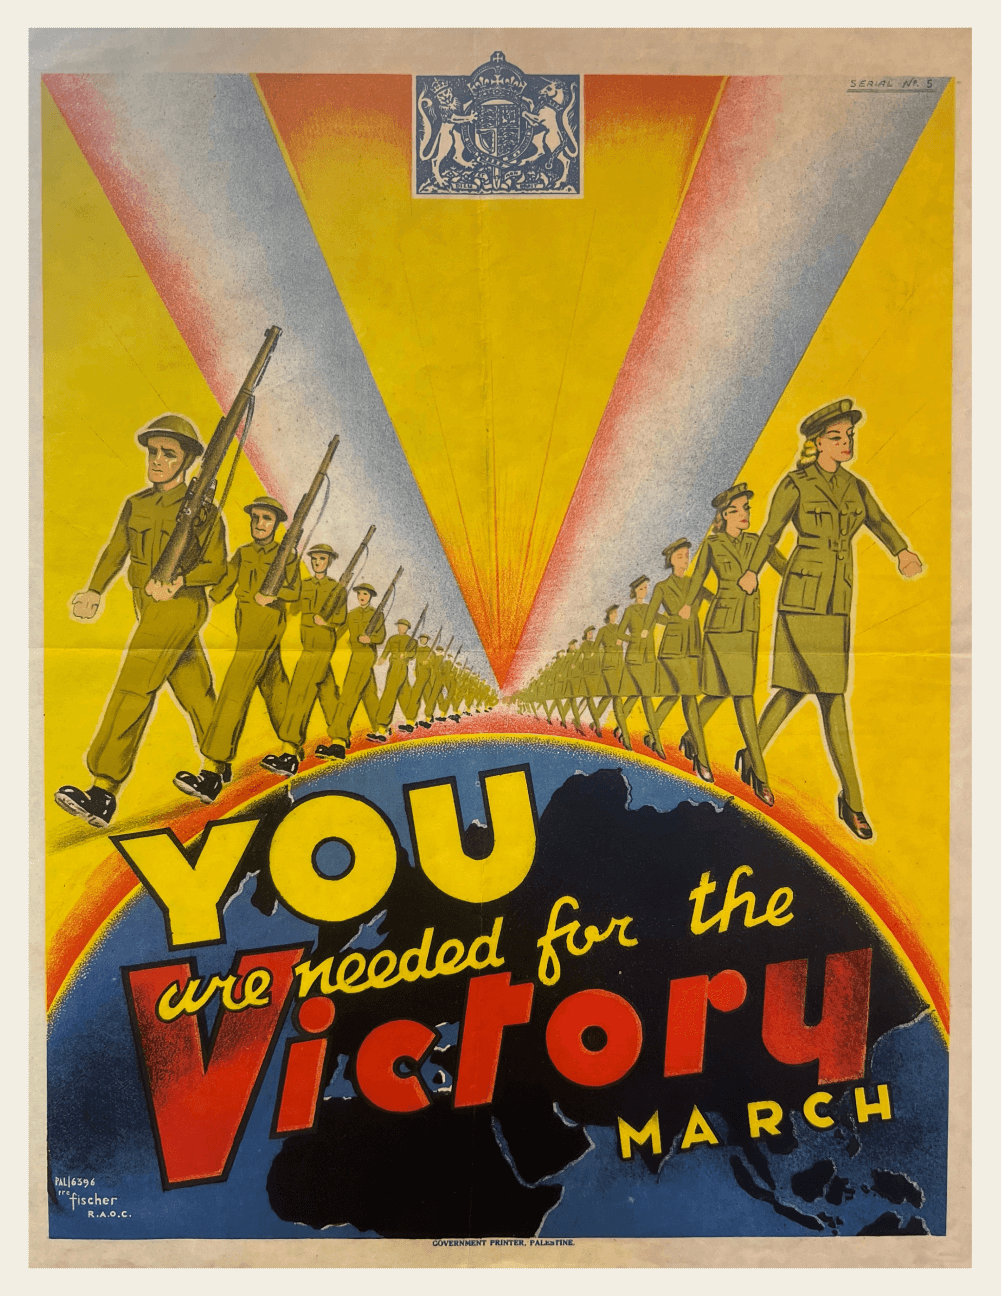 Jewish Brigade Special Recruitment Poster: "You are Needed for the Victory March" WWII, Rare 1943